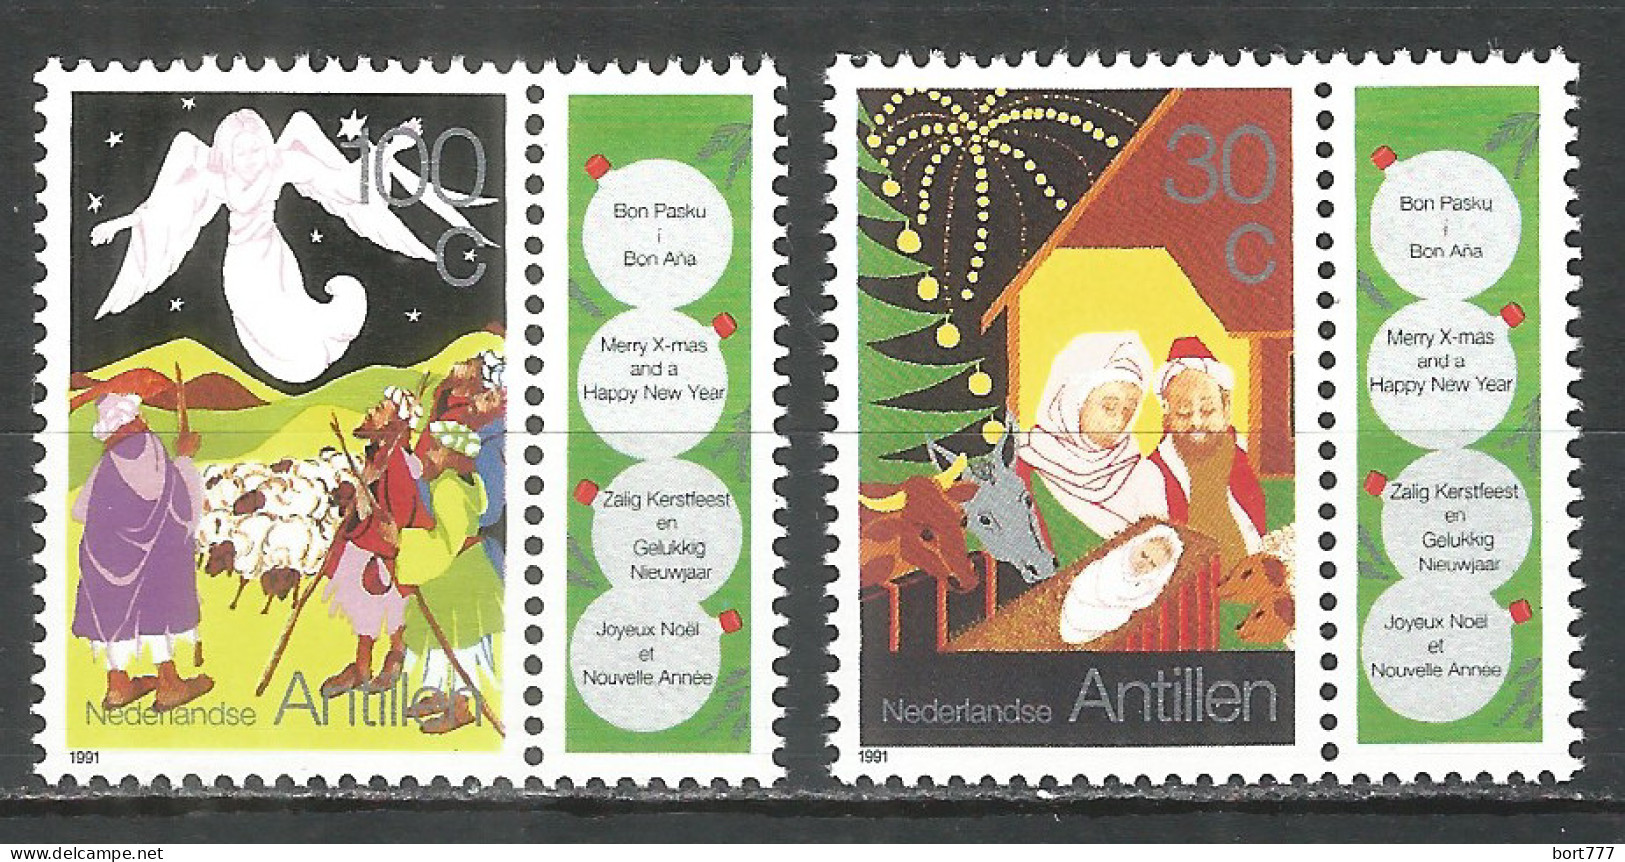 Netherlands Antilles 1991 Year , Mint Stamps MNH (**)  Michel# 734-735 - Curacao, Netherlands Antilles, Aruba